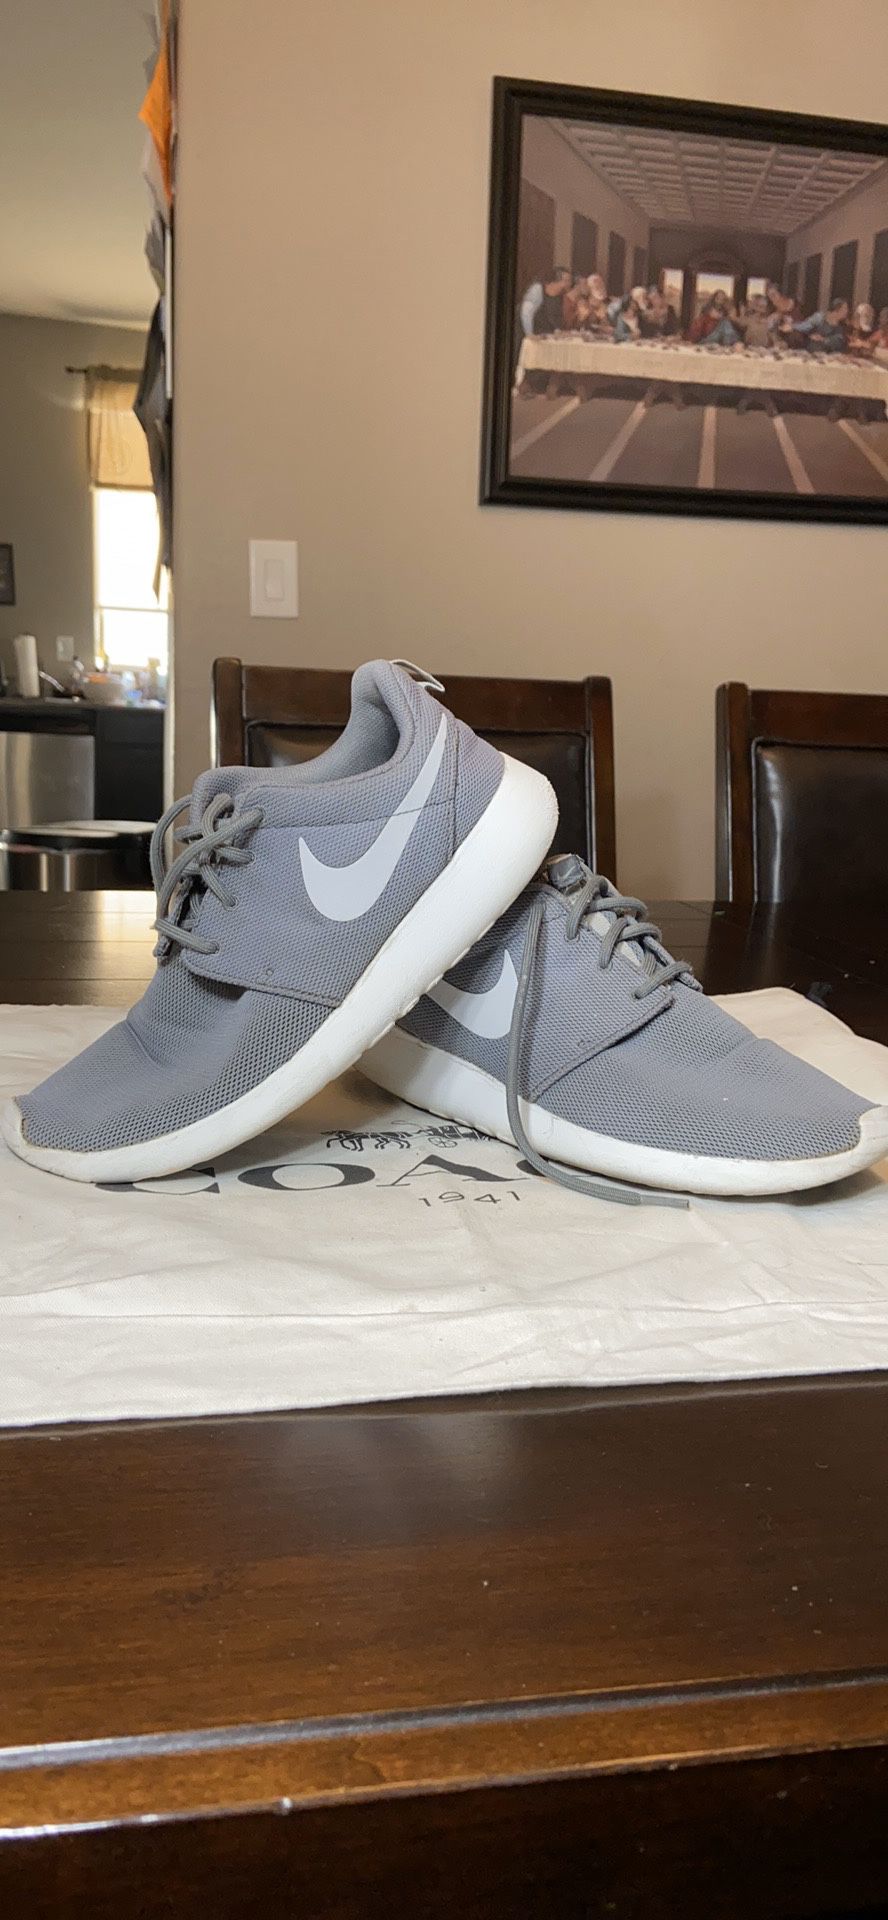 Nike Roshe One Women's Shoes. Size 9.5